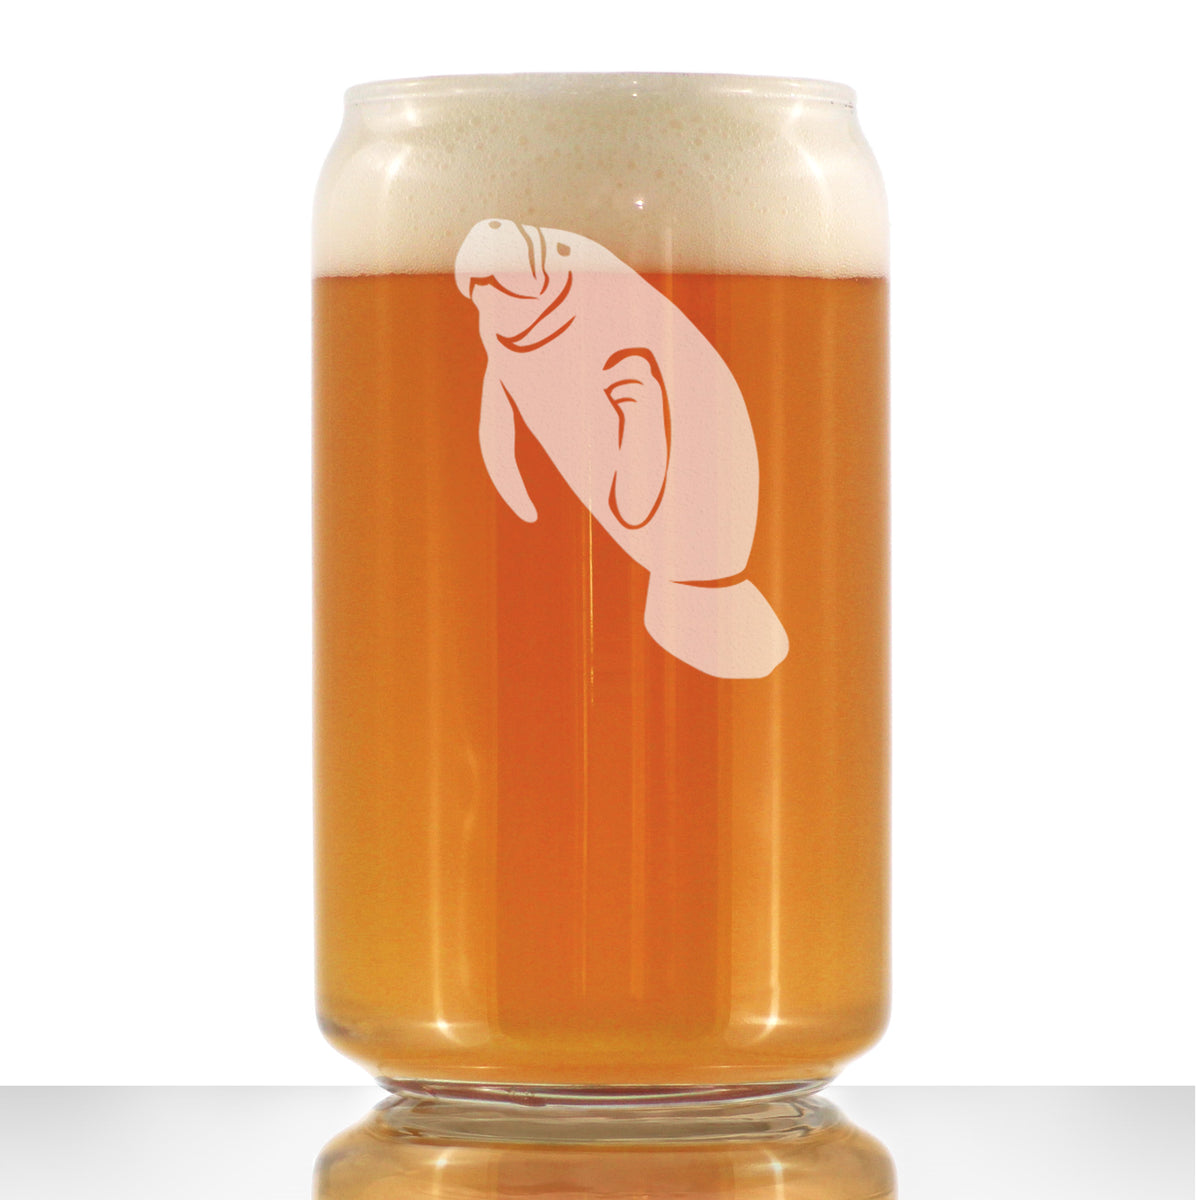 Manatee Beer Can Pint Glass - Cute Funny Ocean Animals Themed Decor and Gifts for Sea Creature Lovers - 16 oz